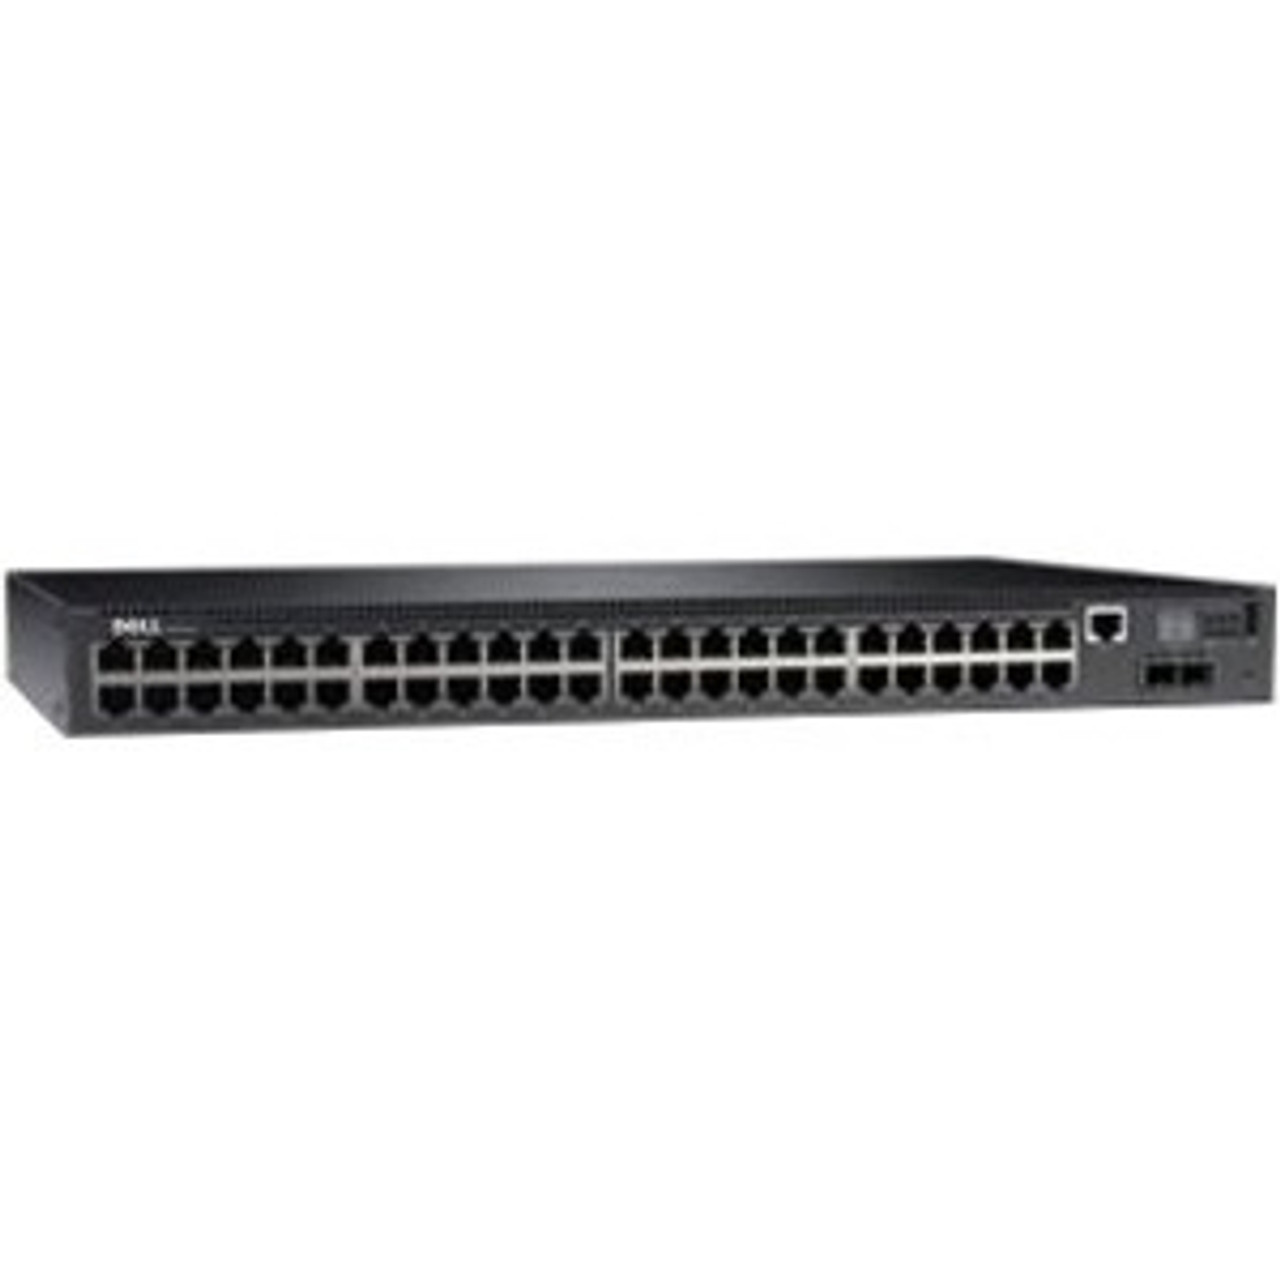 DN_N2048P_1.2 Dell N2048P Ethernet Switch - 48 Ports - Manageable - Gigabit Ethernet, 10 Gigabit Ethernet - 10/100/1000Base-TX, 10GBase-X - 3 Layer Supported -